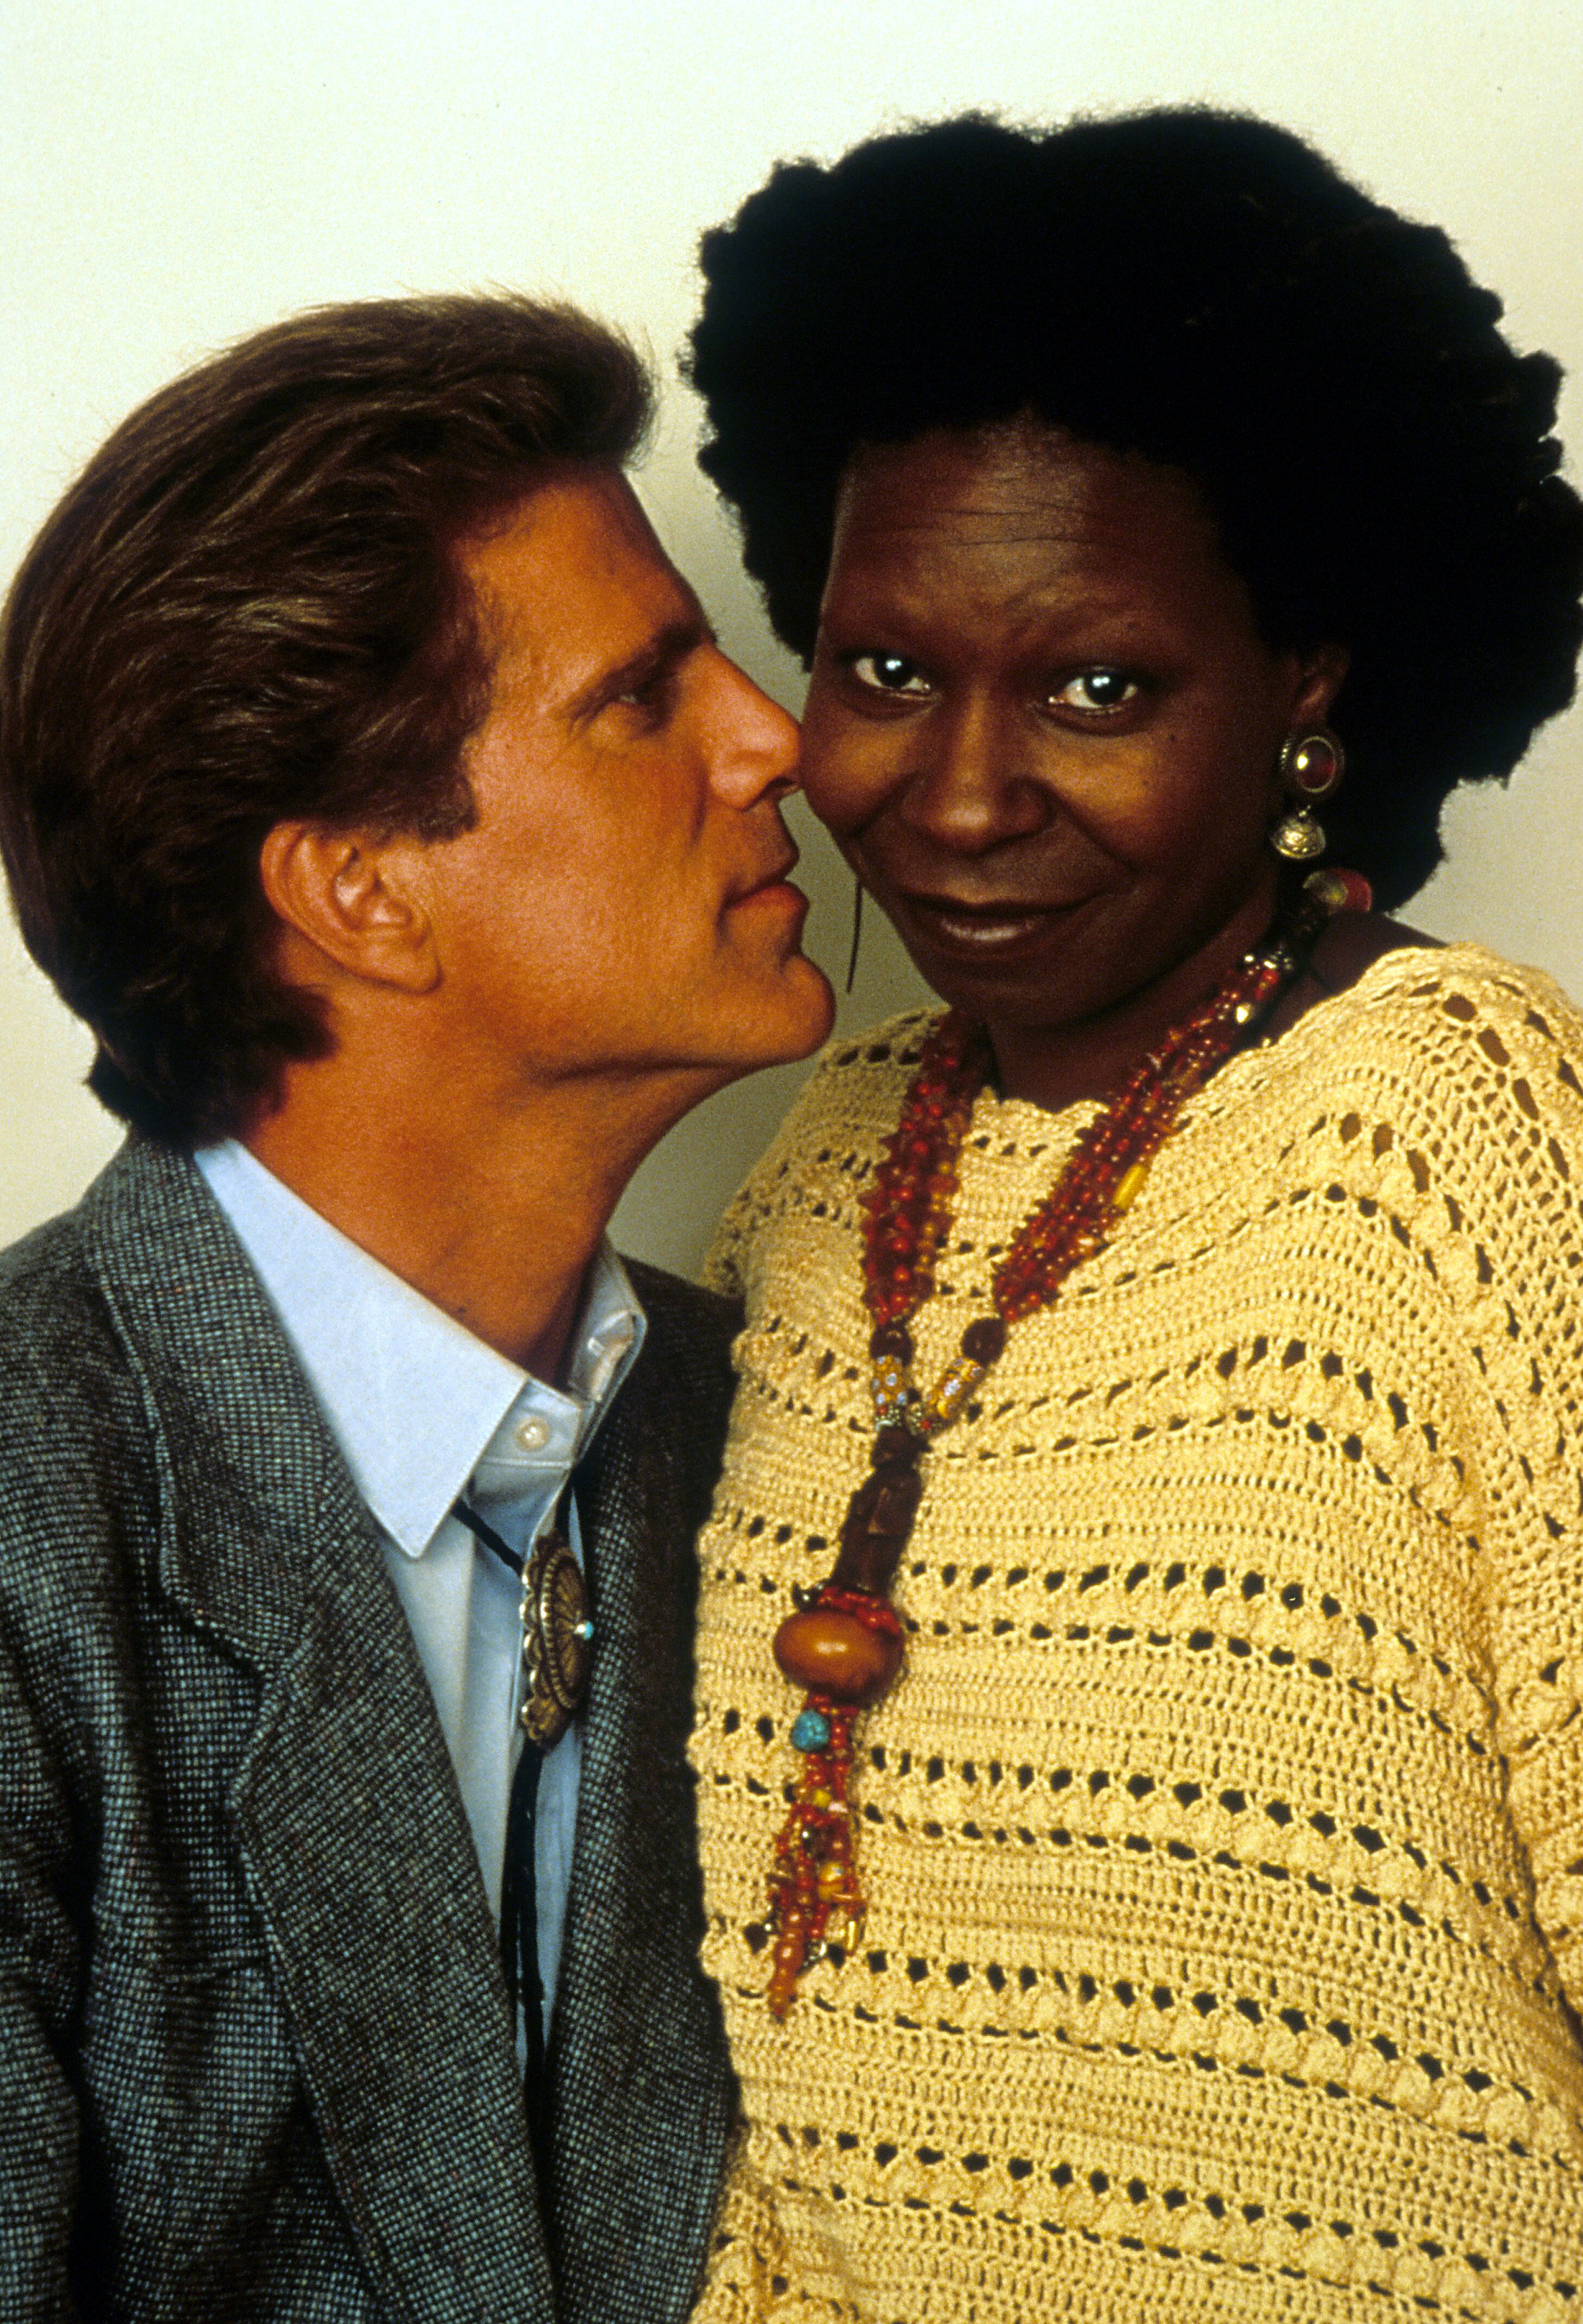 Whoopi Goldberg and Ted Danson in a scene from the film 'Made In America', 1993. | Source: Getty Images